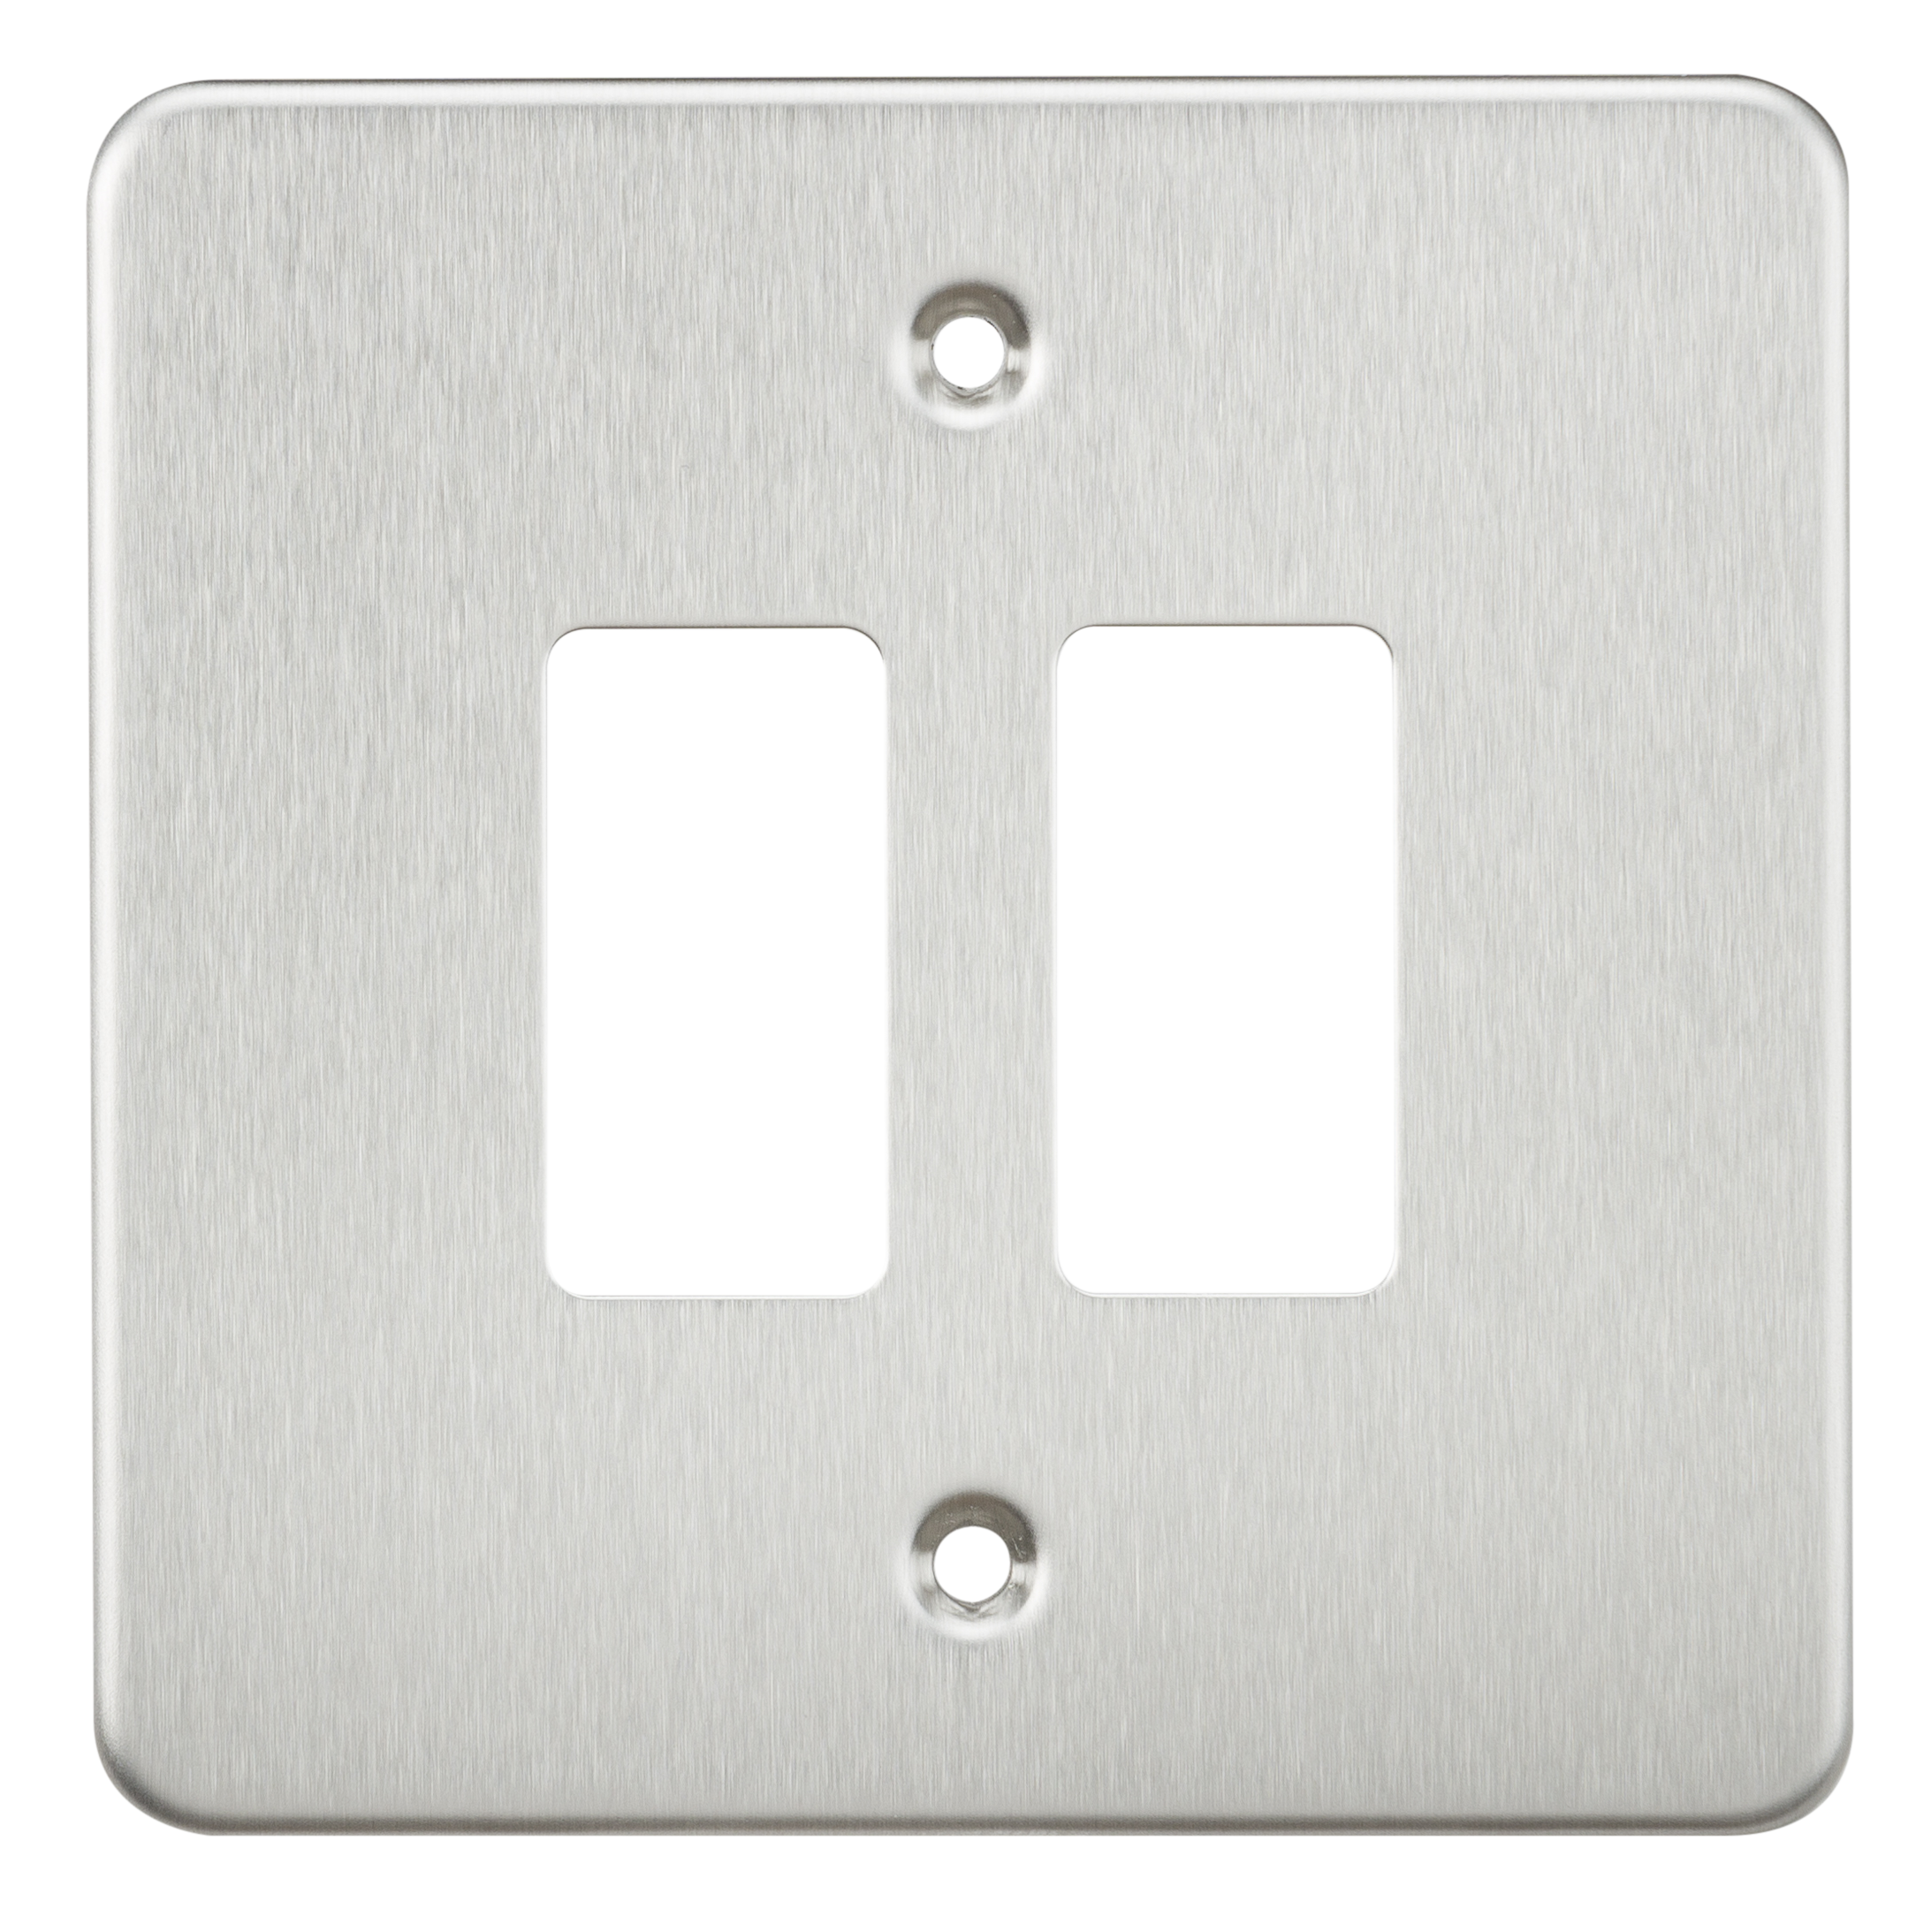 Flat Plate 2G Grid Faceplate - Brushed Chrome - GDFP002BC 